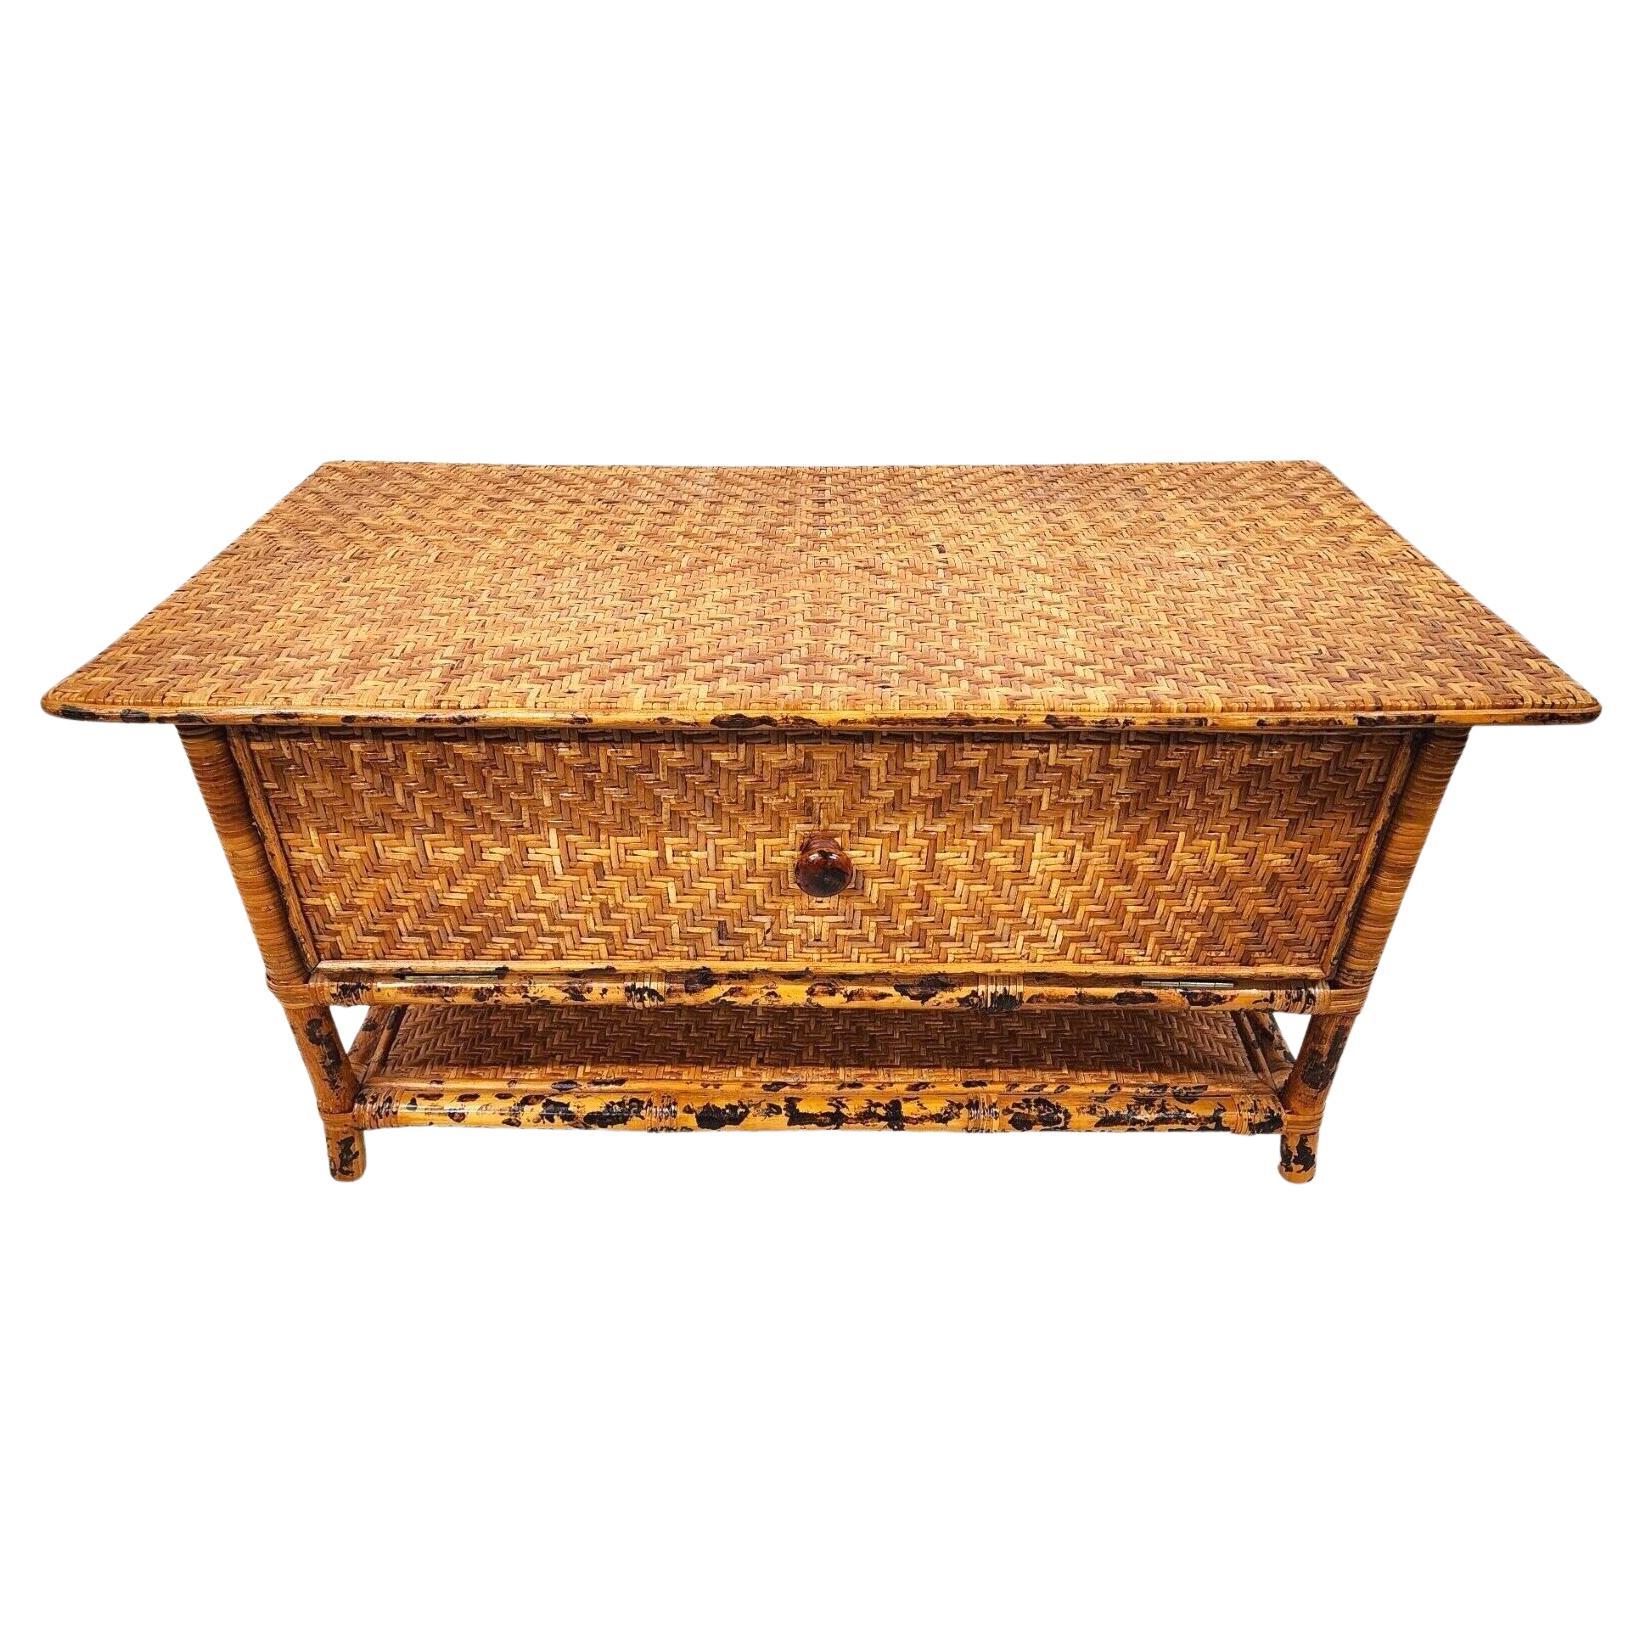 Vintage French Style Faux Tortoise Burnt Bamboo Rattan & Wicker coffee table or bench
Very nice piece with a storage compartment. Beautiful as a coffee table or will easily support weight if you wanted to use it as a bench or ottoman.
Would look